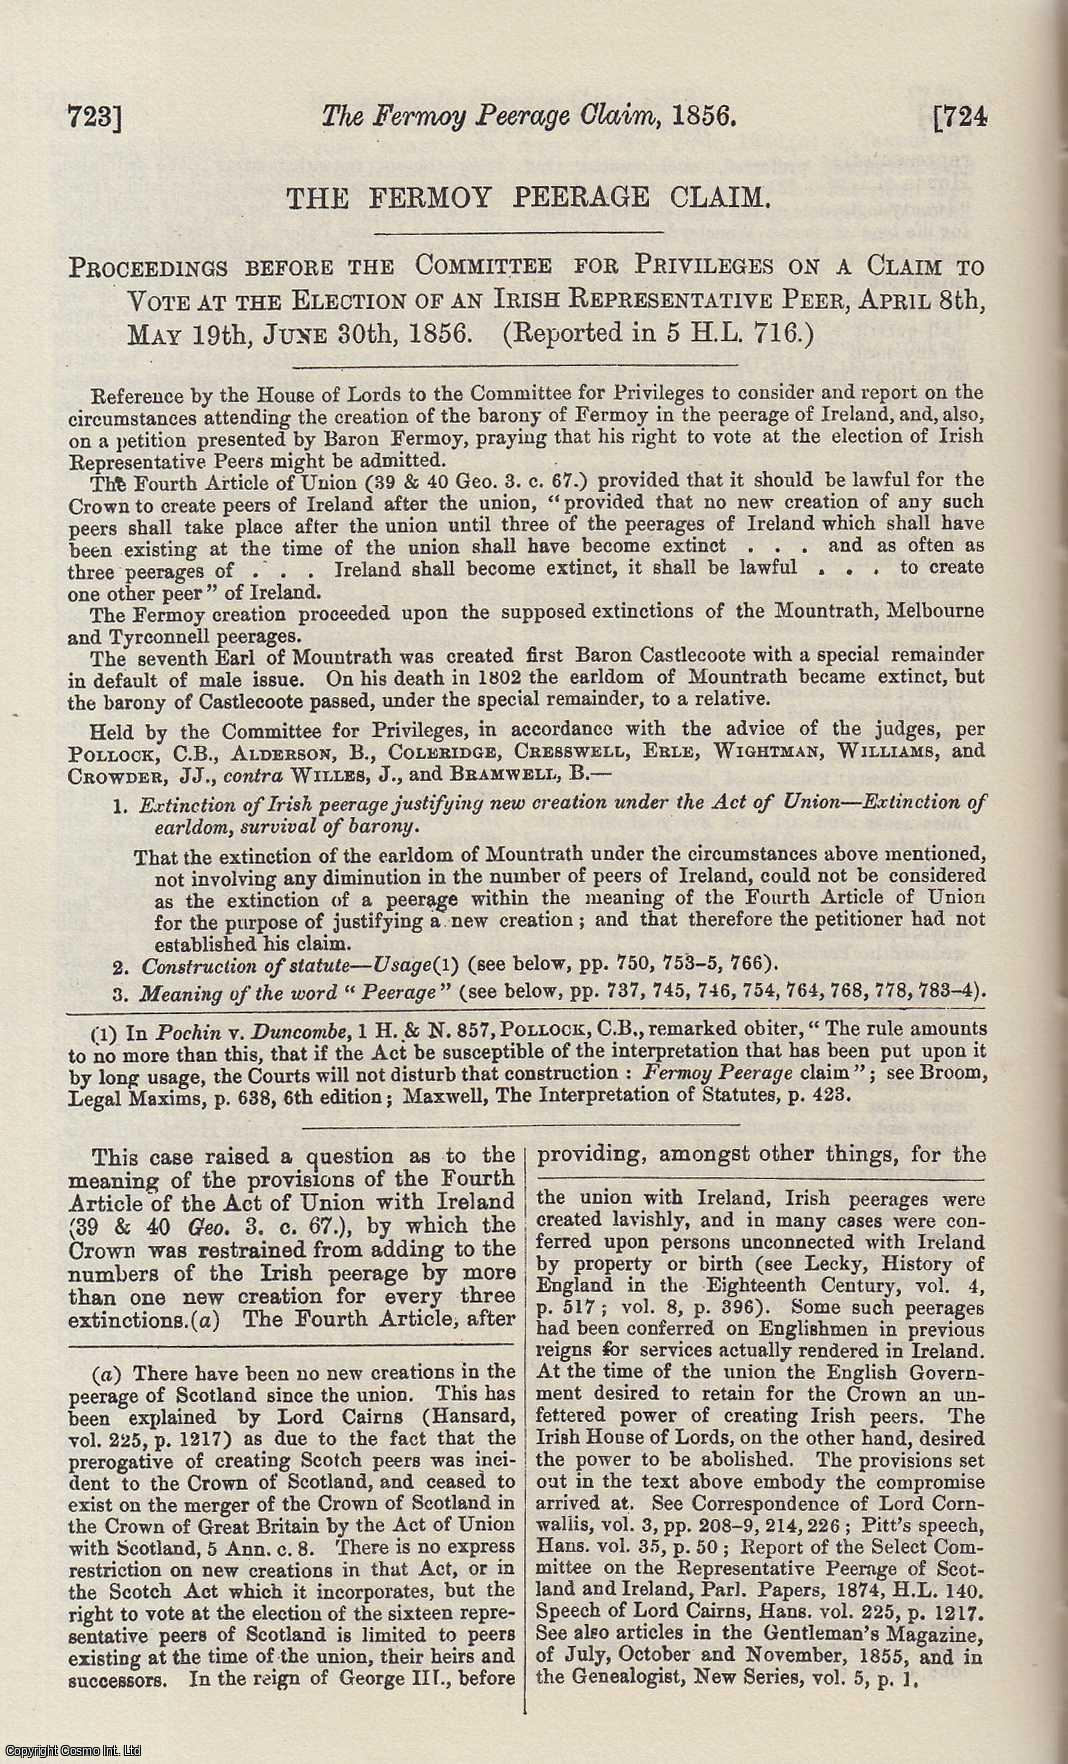 Trials - The Fermoy Peerage Claim. Proceedings before the committee for privileges on a claim to vote at the election of an Irish Representative Peer, 1856. An original article from the Reports of State Trials, New Series, HMSO, 1898.